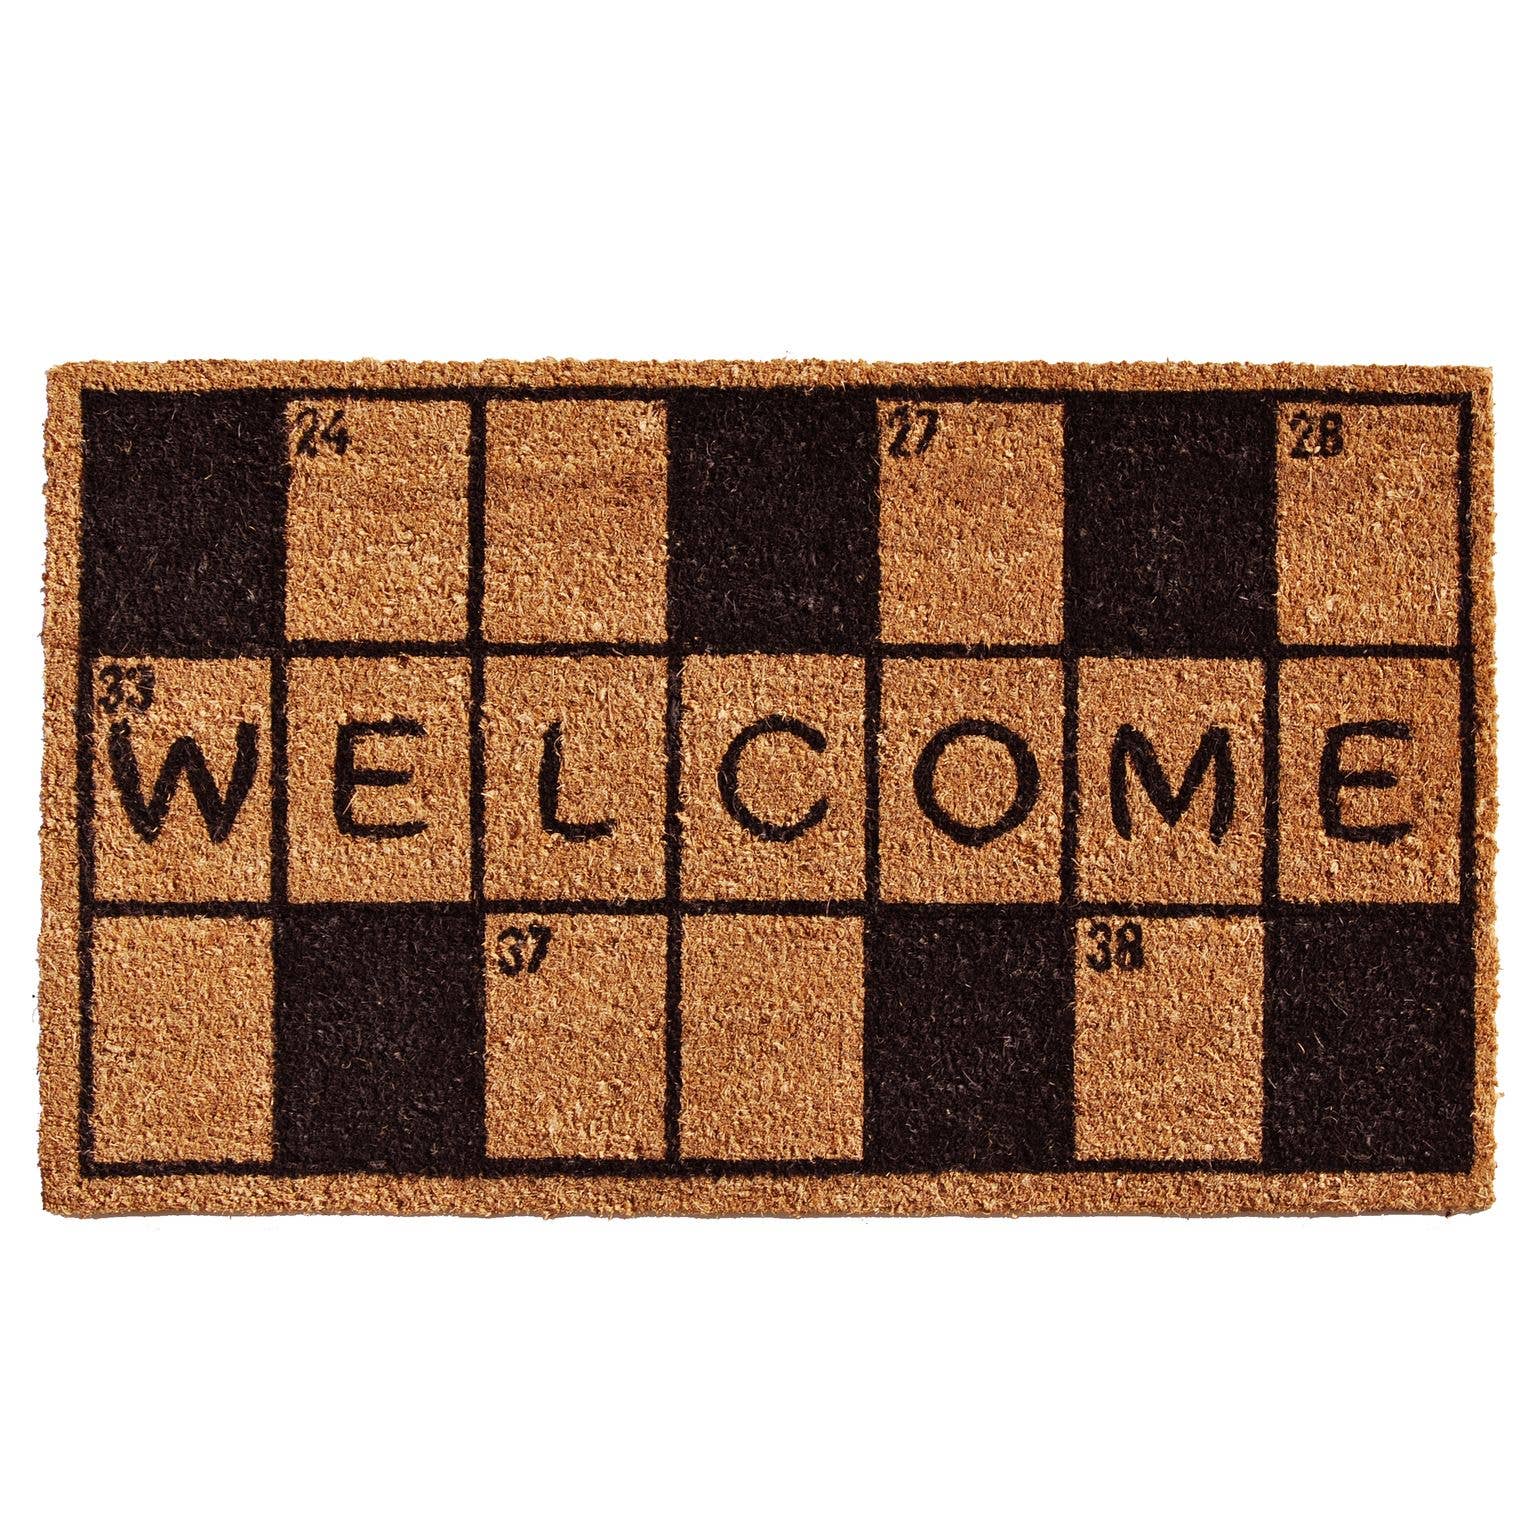 Scrabble Crossword Welcome Mat-Coir, Made in the USA! - The Pink Pigs, A Compassionate Boutique